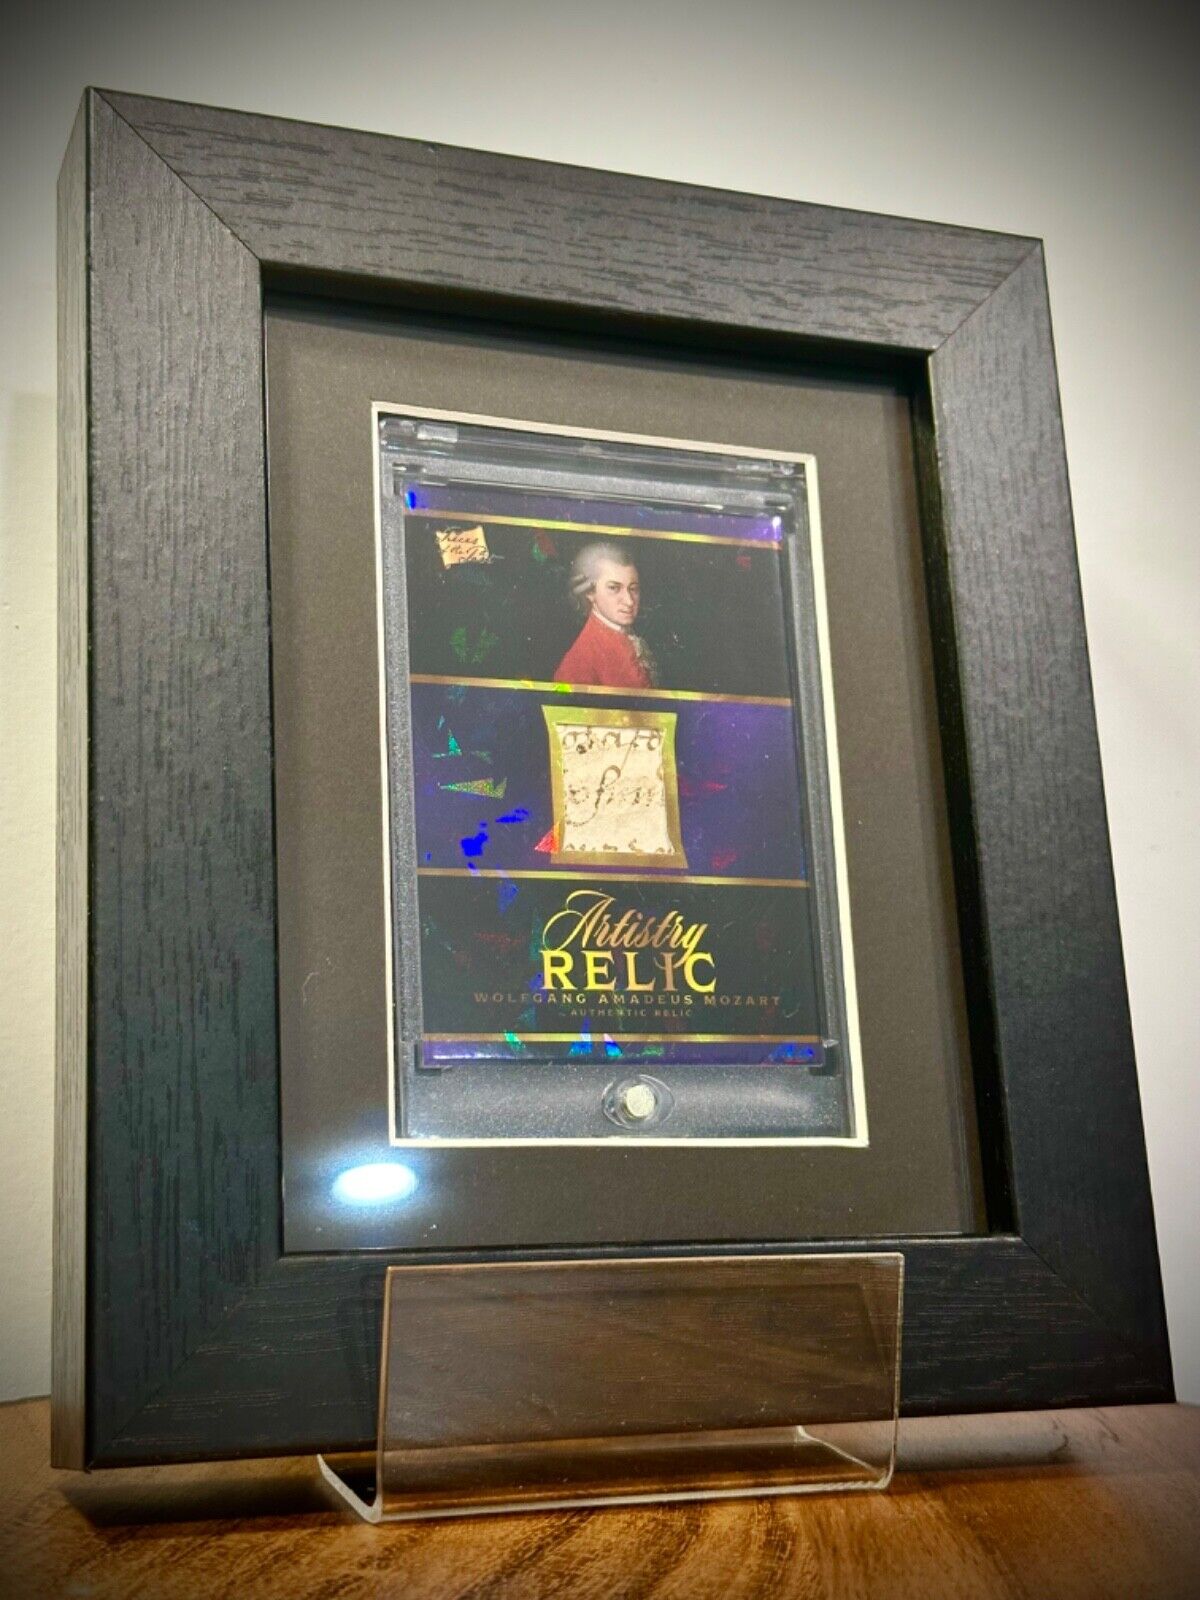 LEGENDARY COMPOSER - MOZART - EXTREMELY RARE HANDWRITTEN RELIC FRAMED DISPLAY